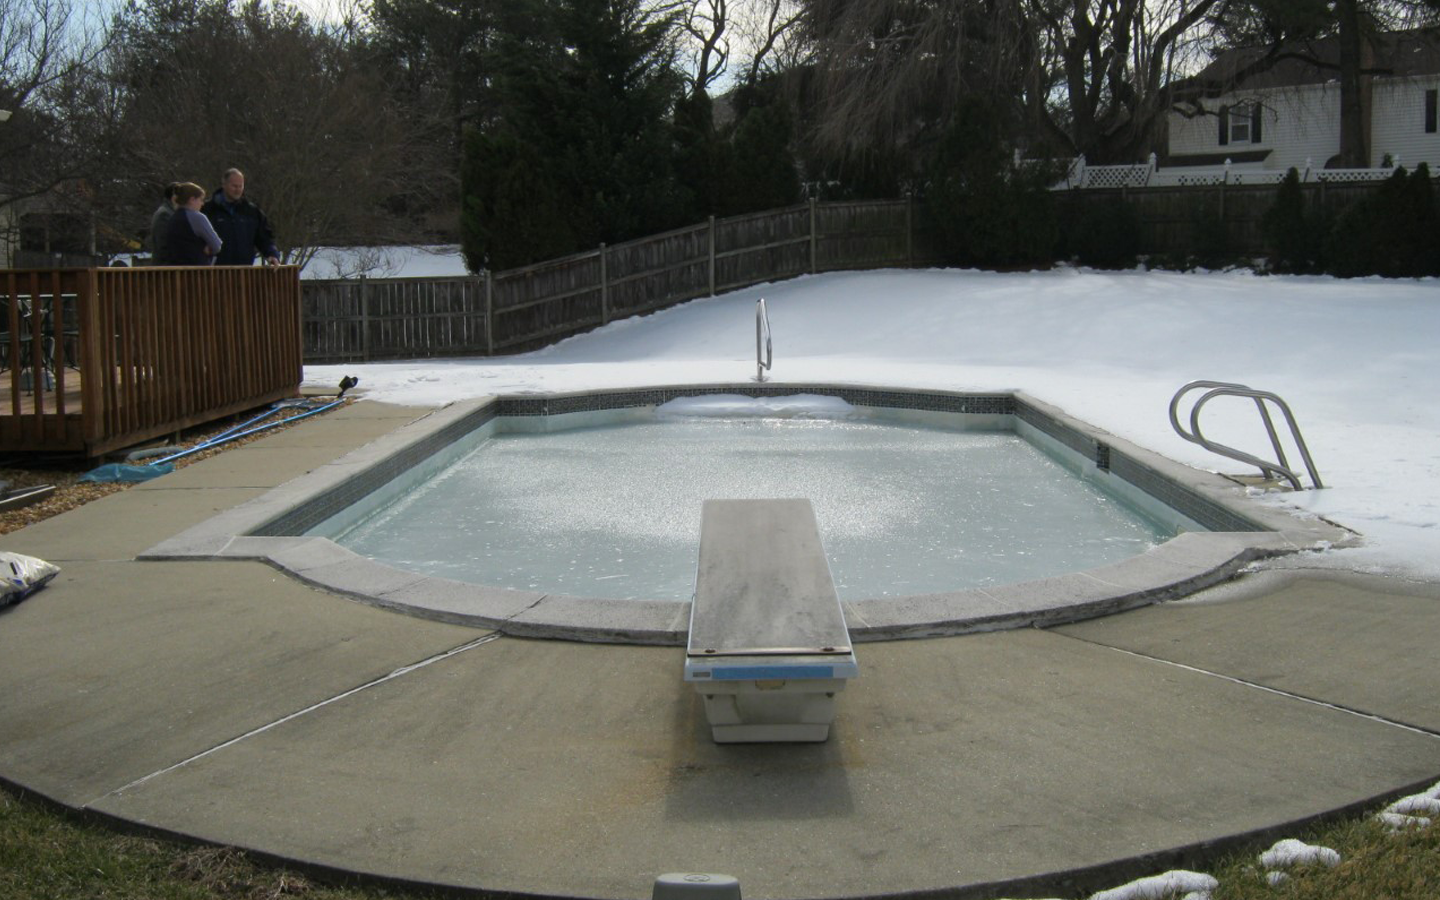  This pool, beyond the noticeable missing tile, sunken patio, and cracked coping, also shows signs of beam damage around the shallow end entrance. The client wanted to bring this pool up to speed. Our design team came up with an excellent update plan